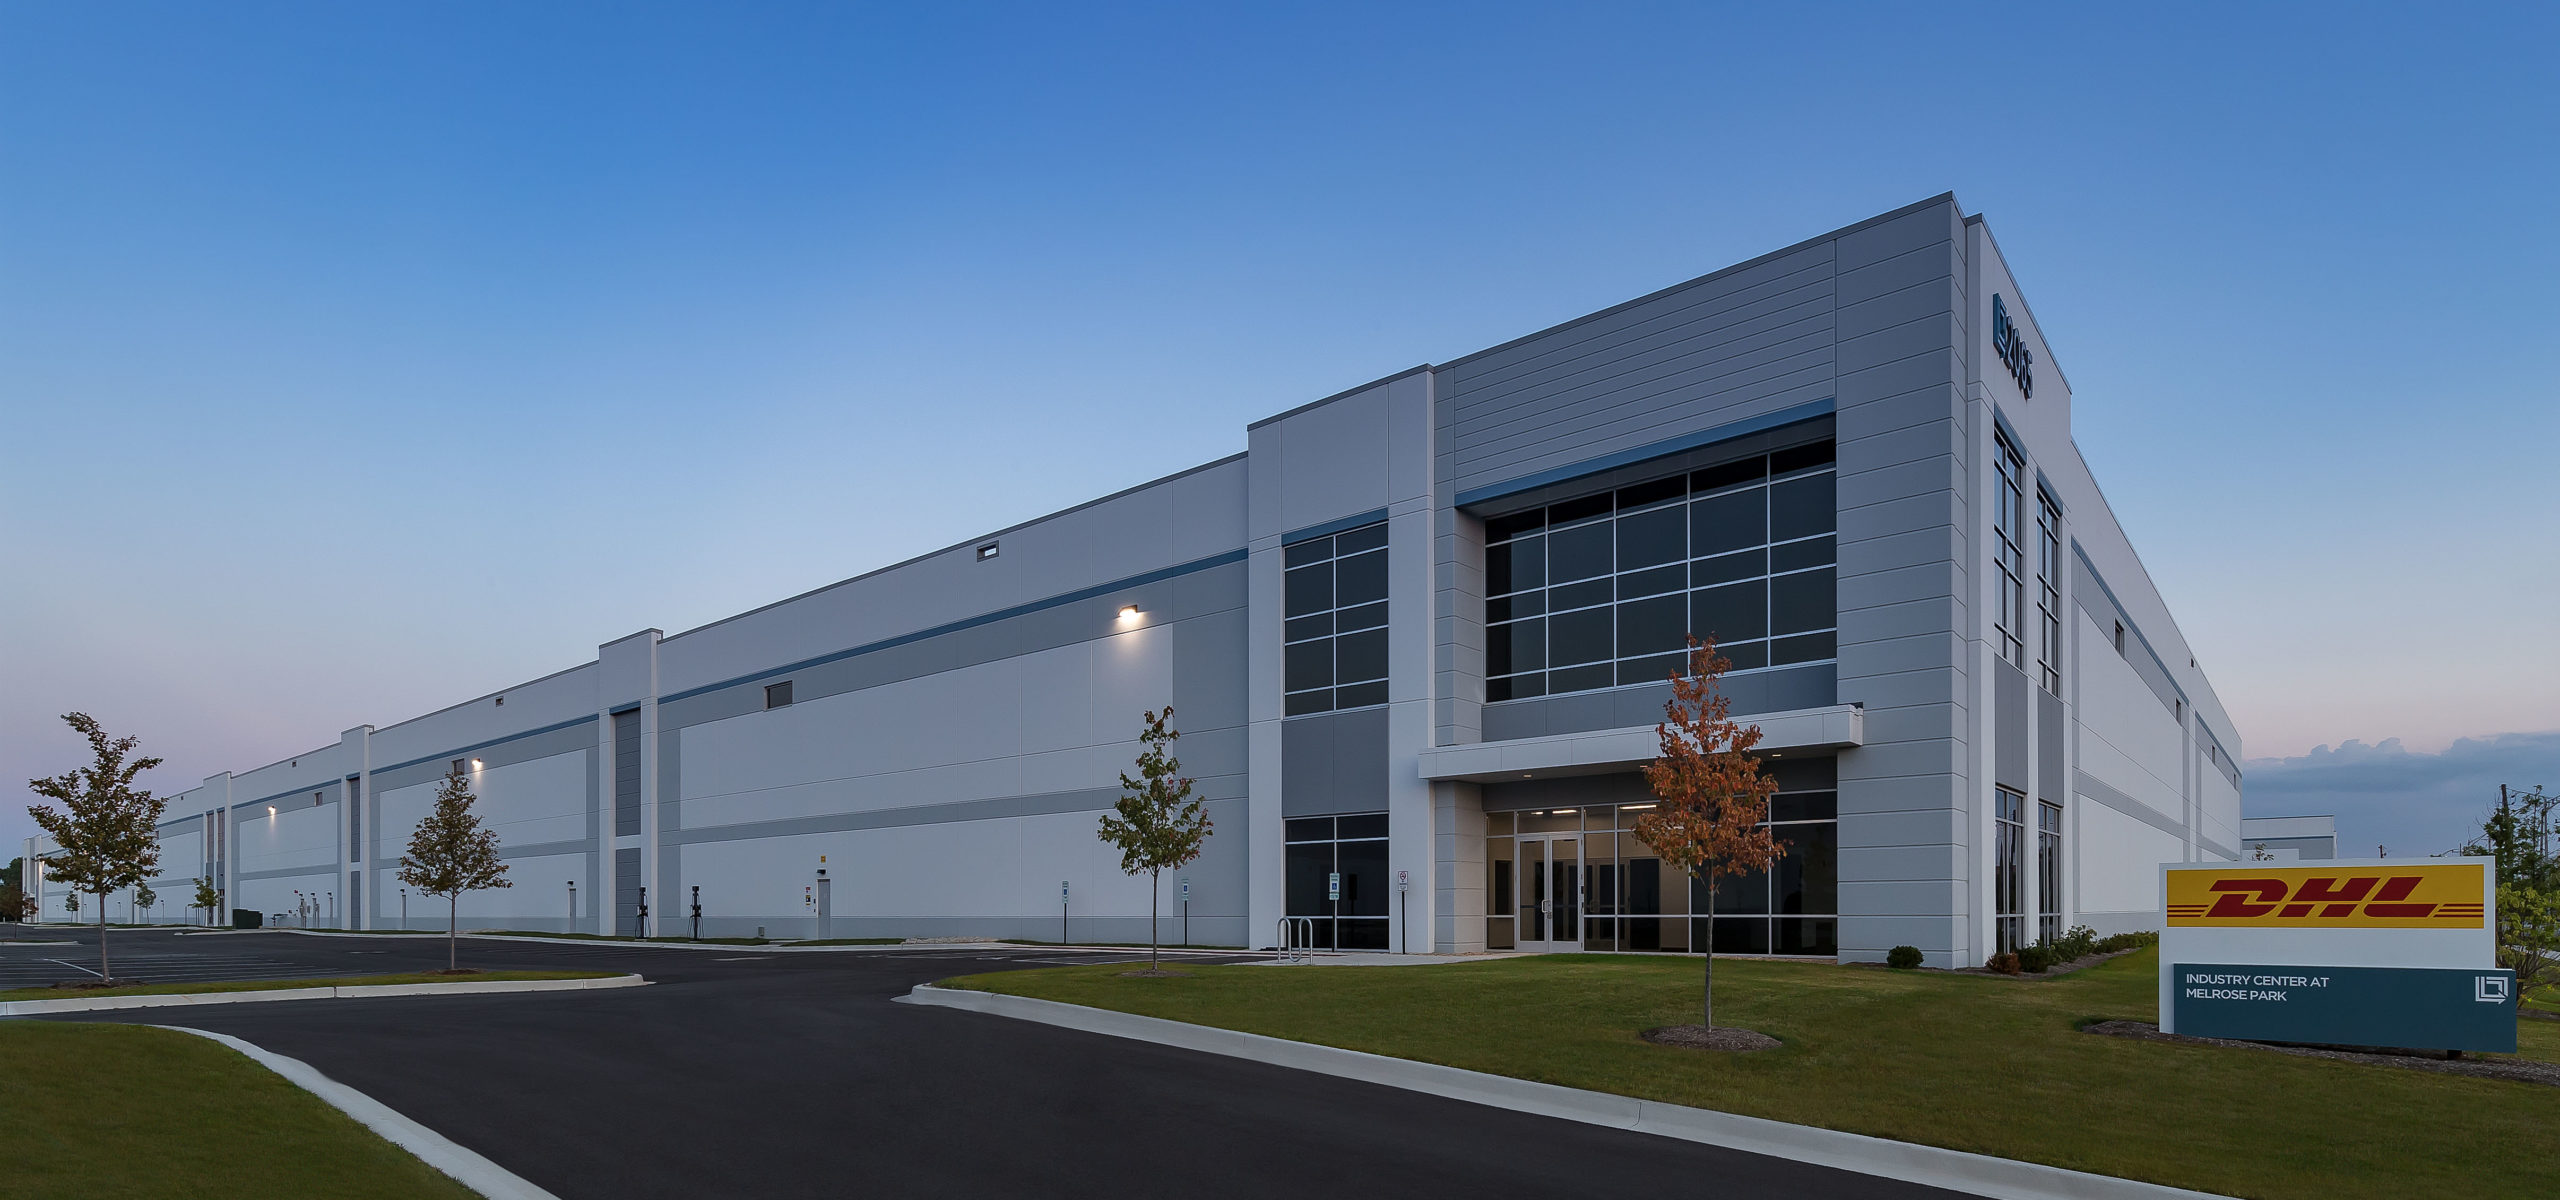 McShane Completes Industry Center at Melrose Park